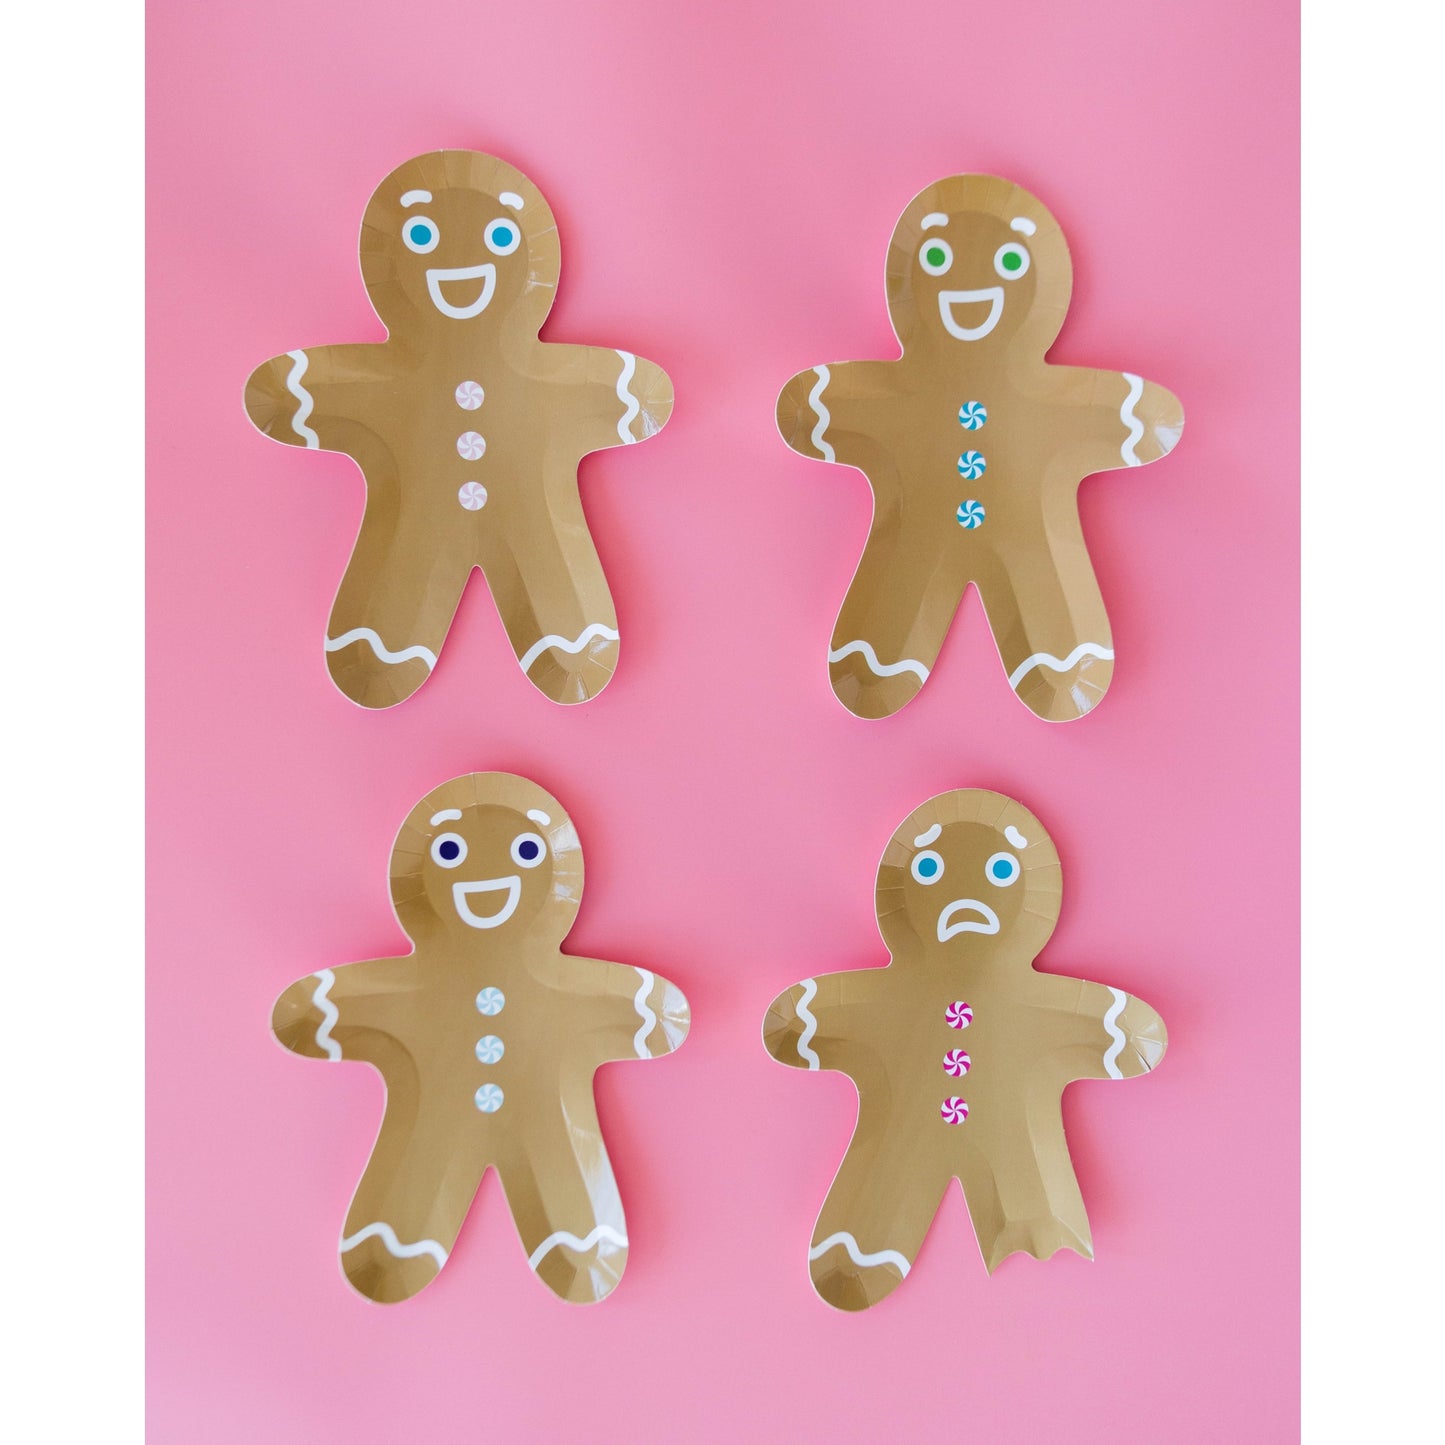 Gingerbread Figures Small Plate Set (8 Pk)